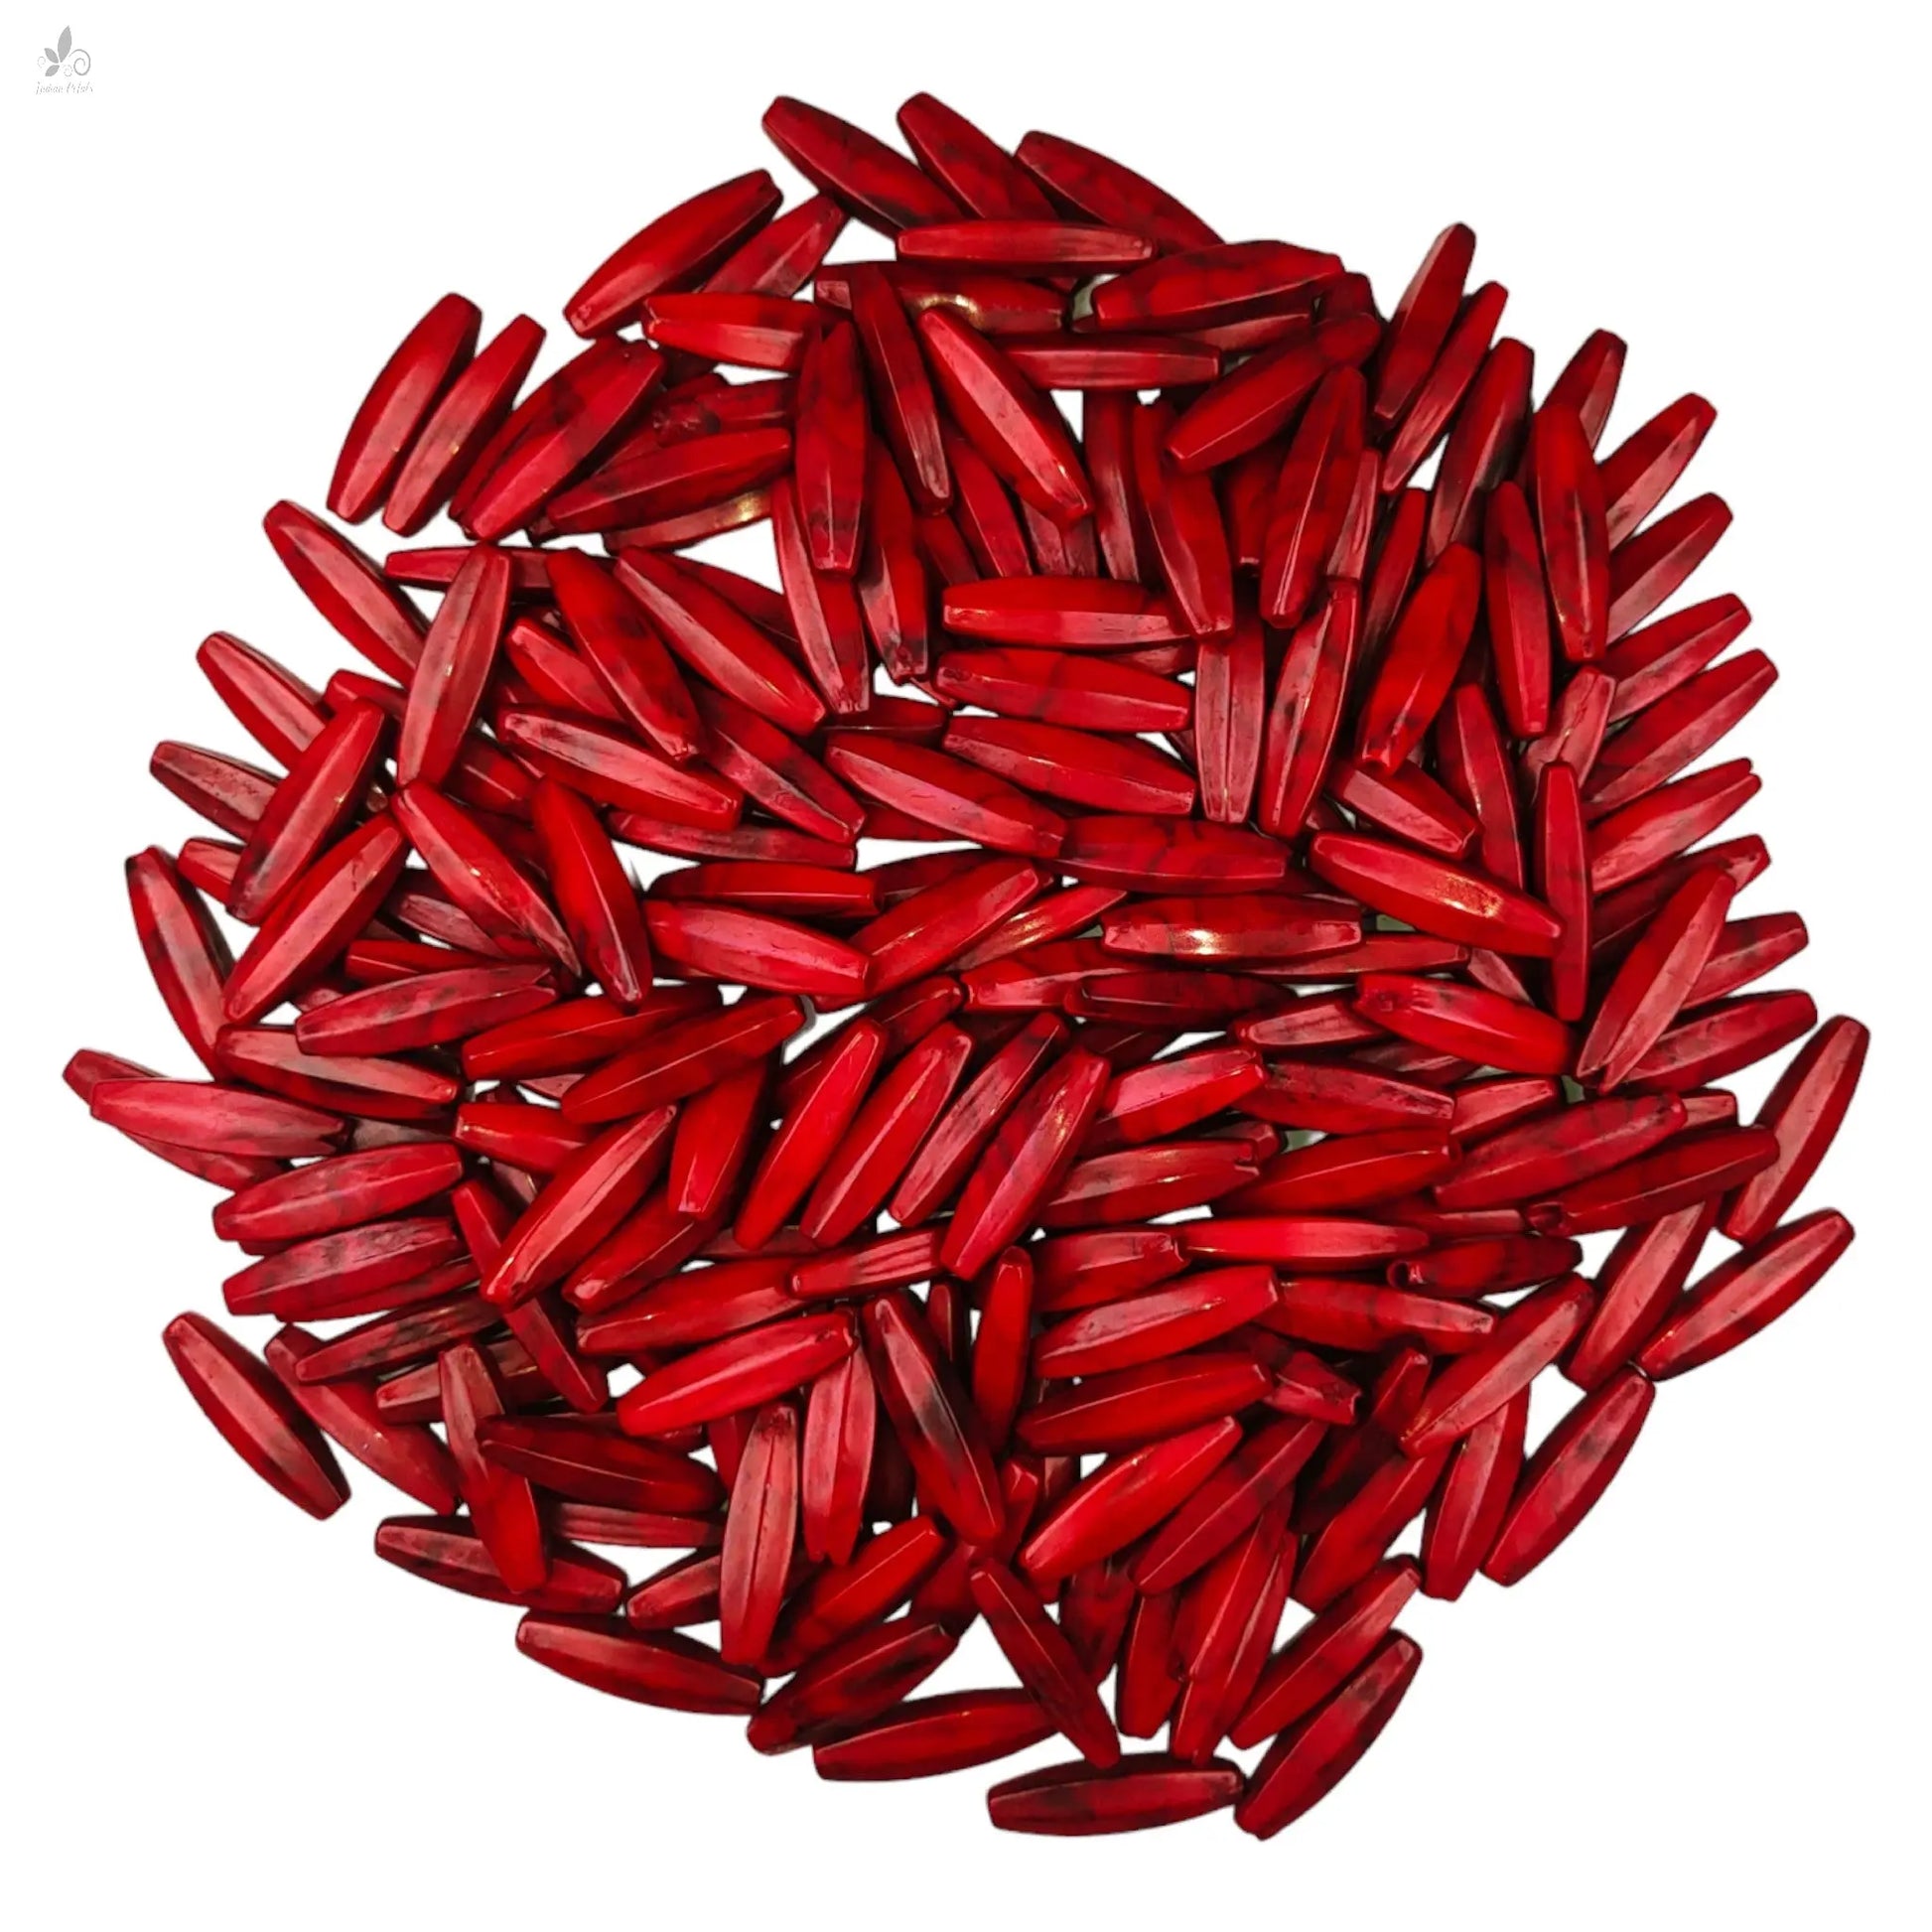 Dark Red Resin Pipe Motif for Craft or Decoration, Jewelry Making - 13558